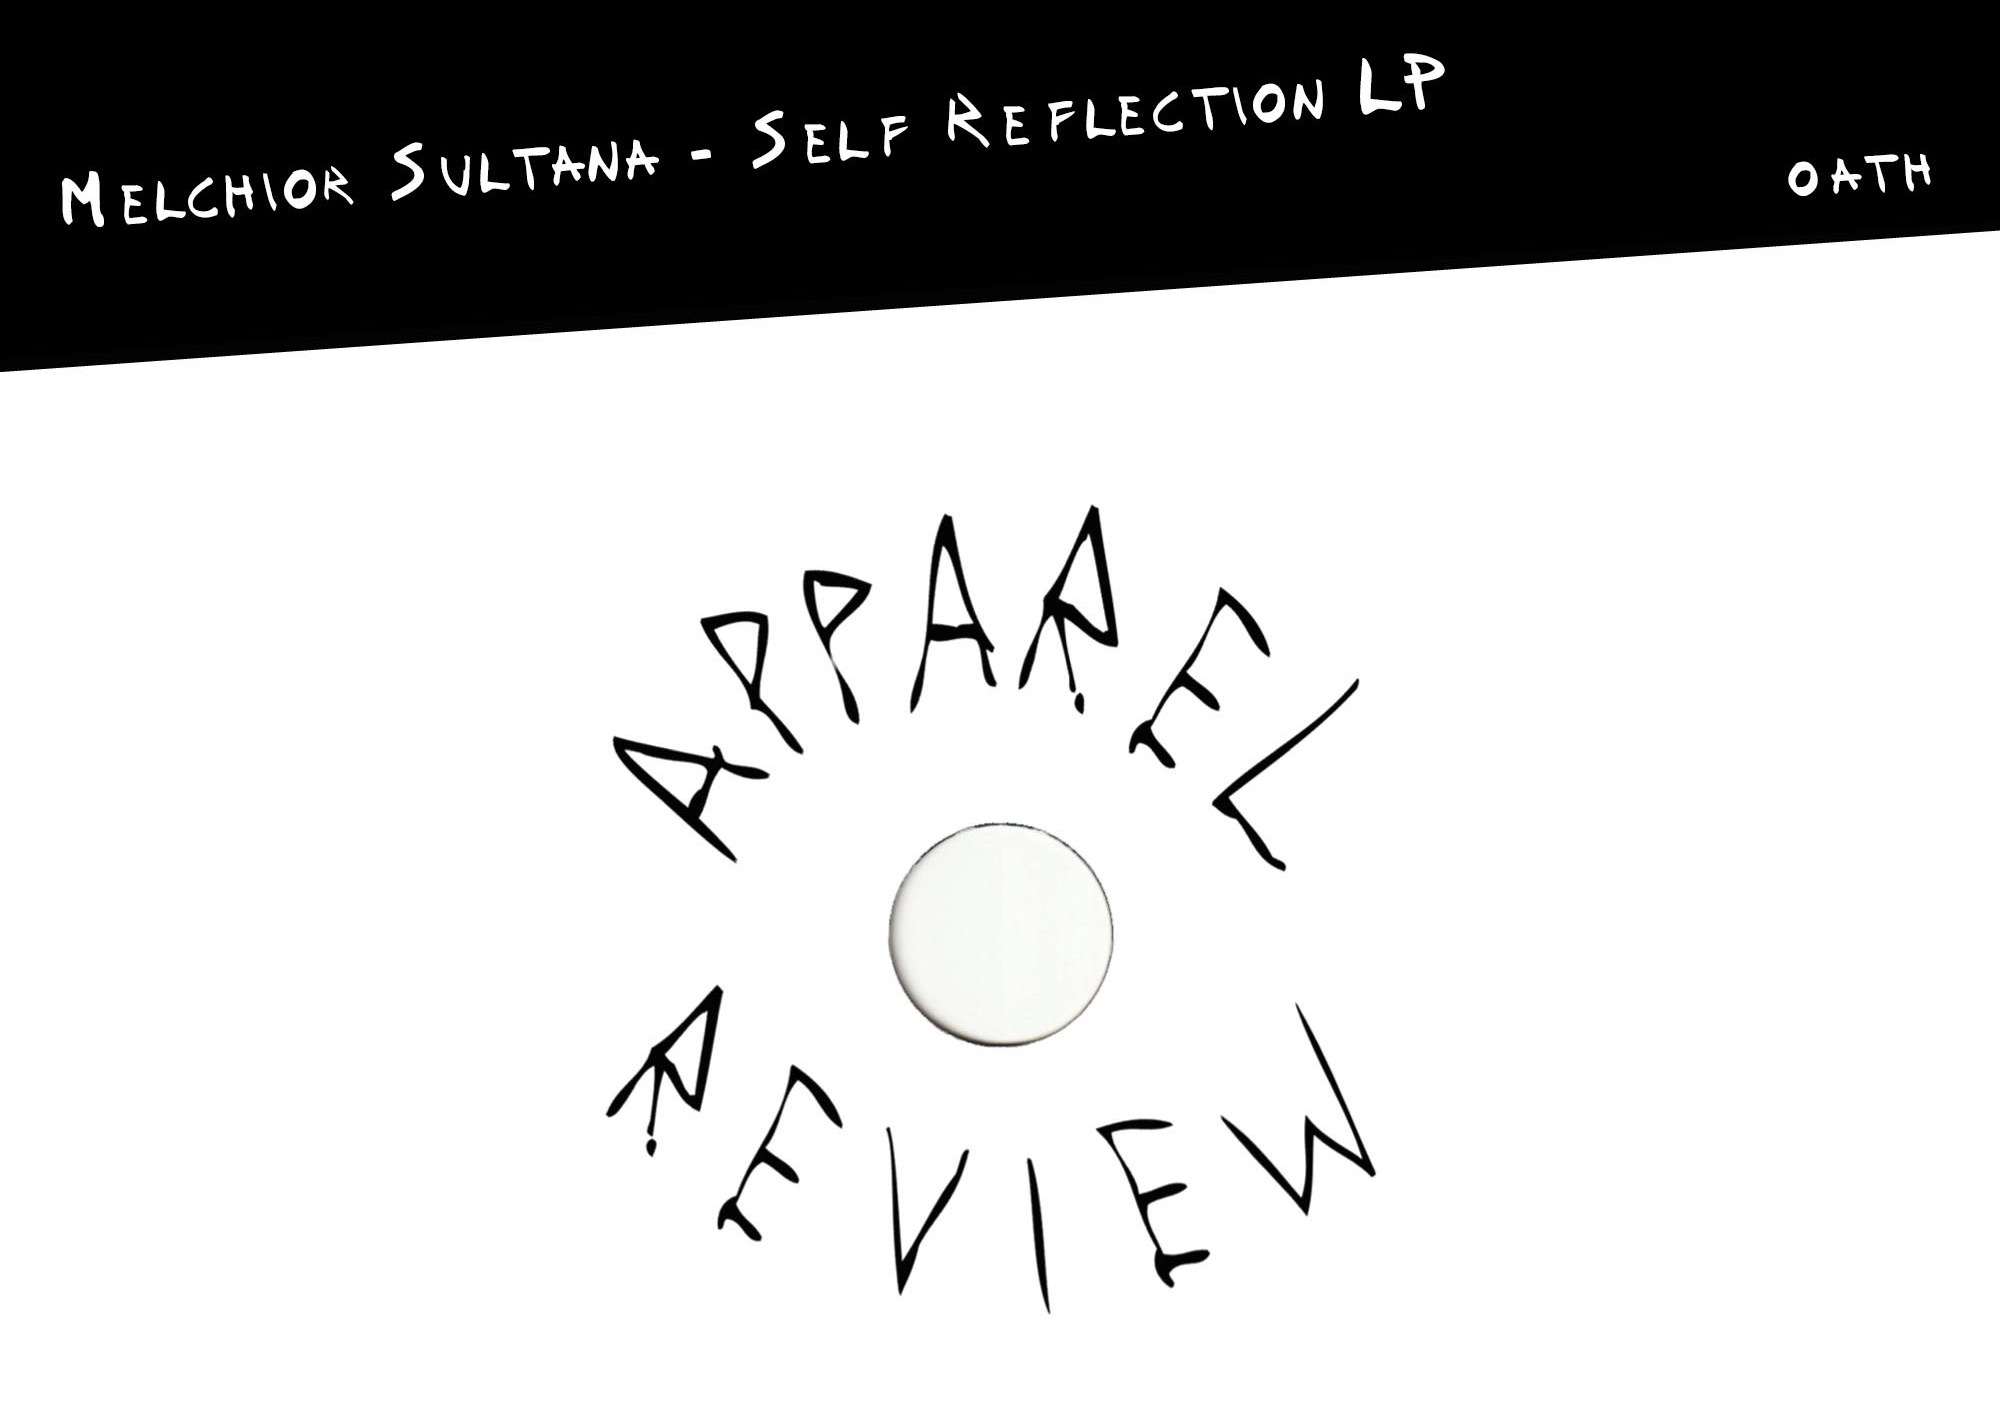 Apparel-Review Melchior Sultana – Self Reflection LP (Oath) cut